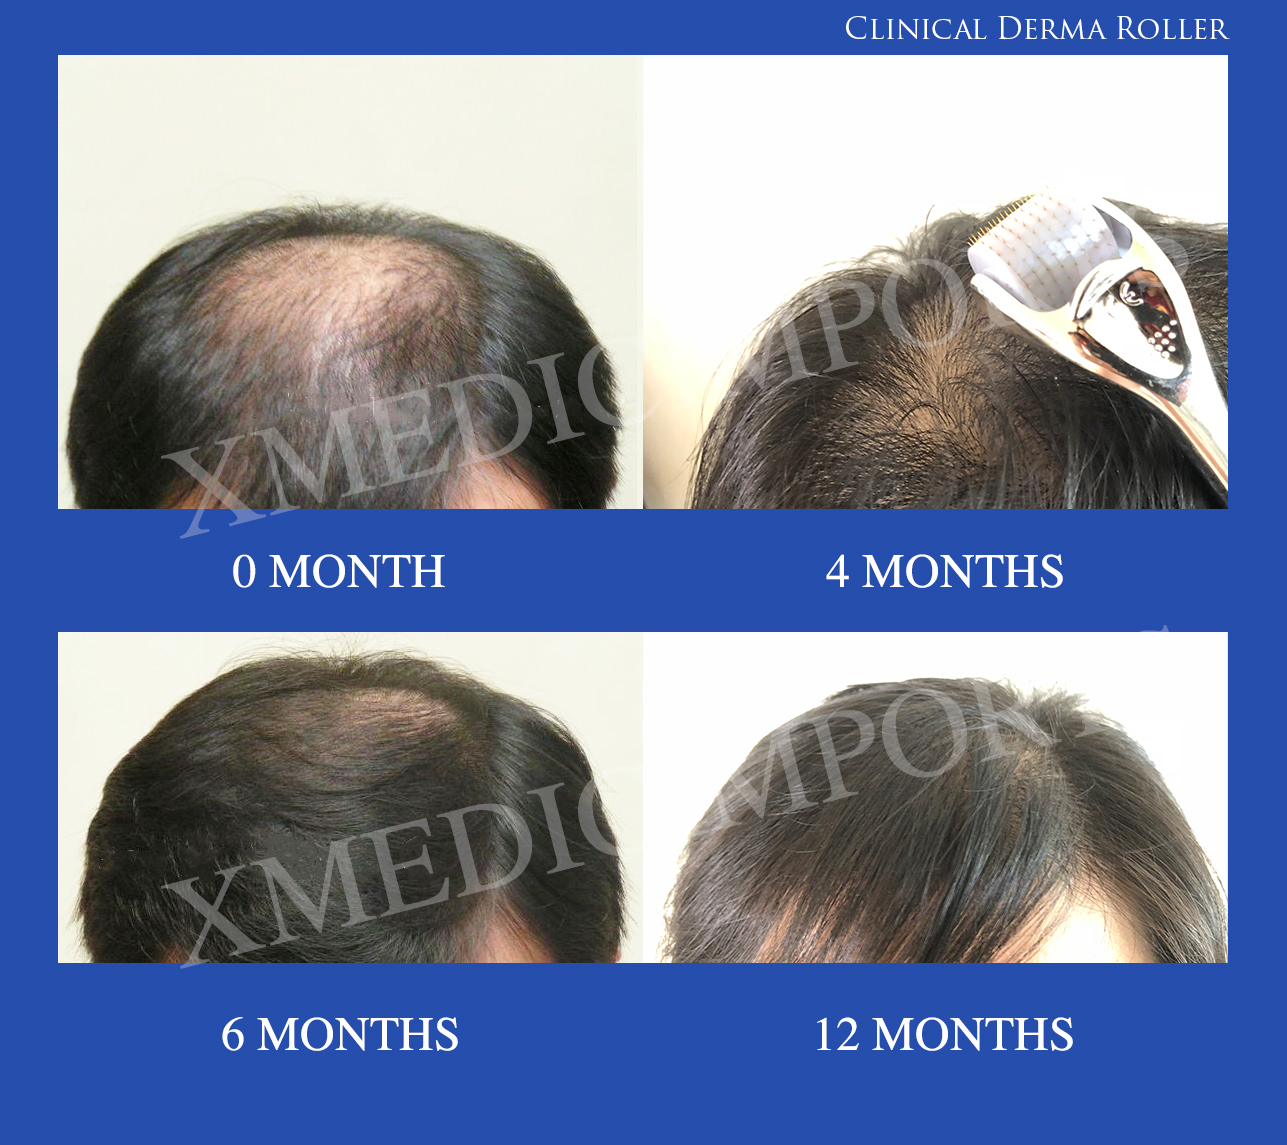 PART 2- Microneedling / Derma roller and pen for hair loss